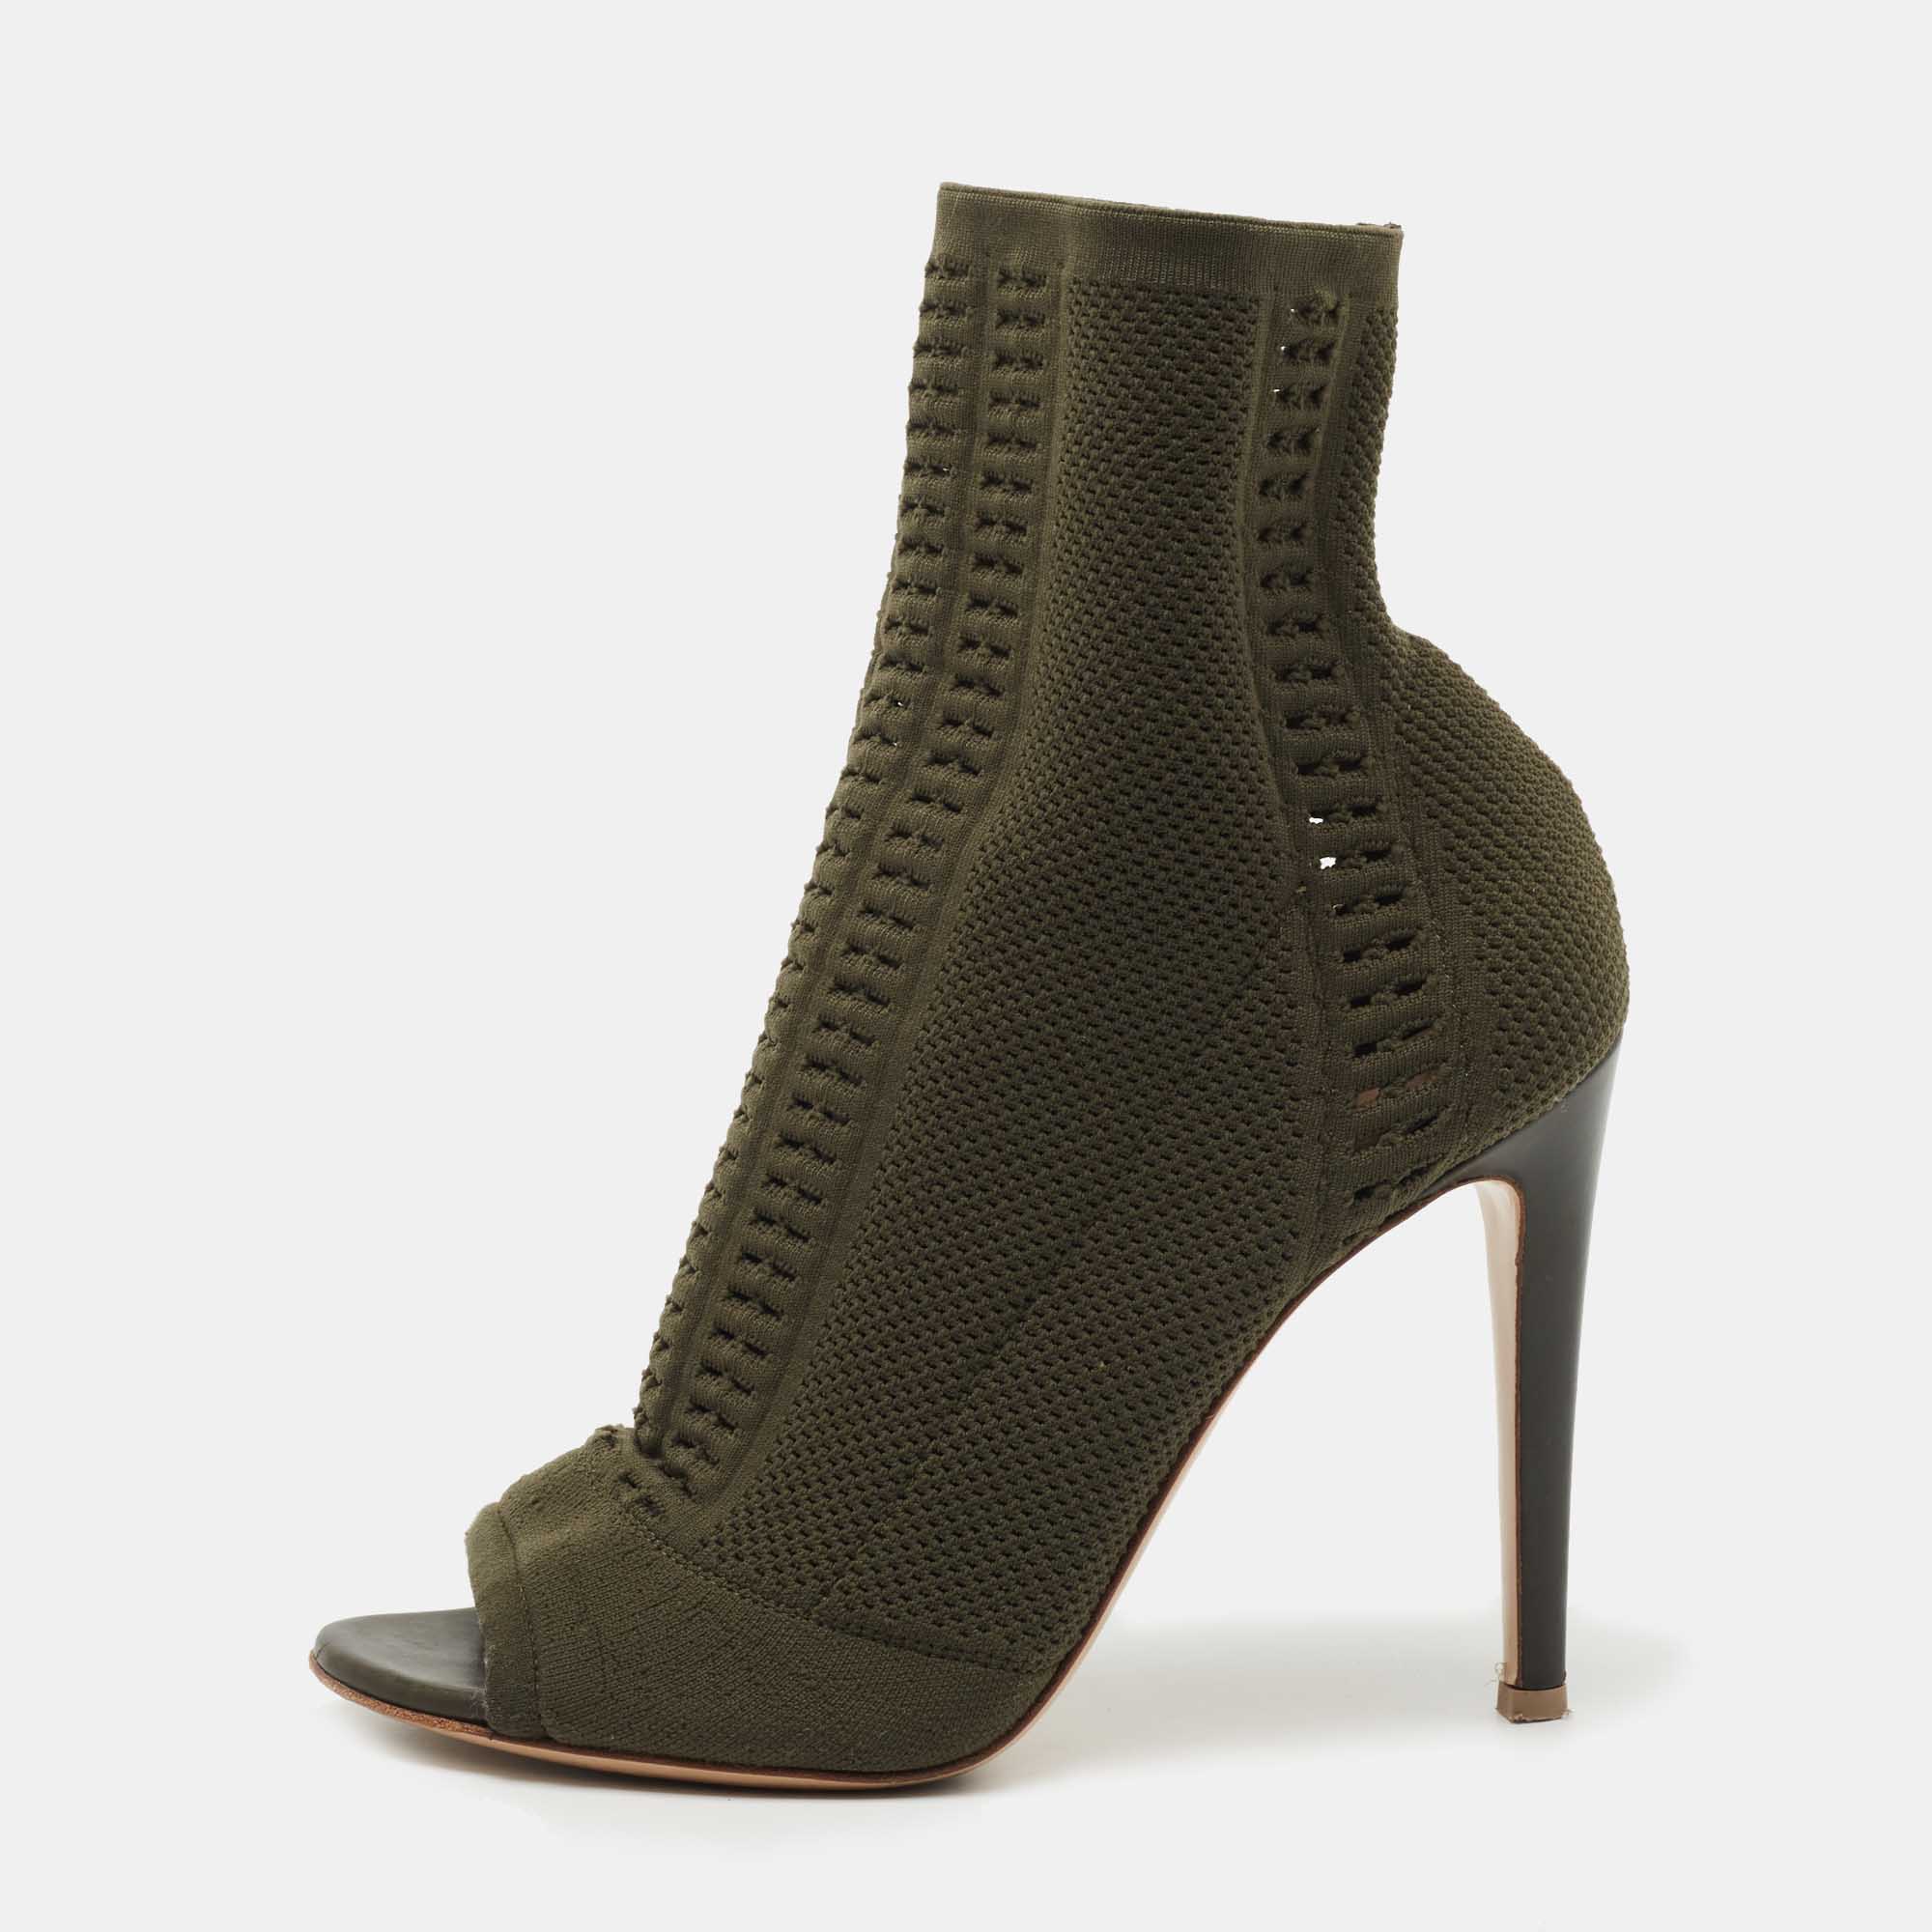 Pre-owned Gianvito Rossi Army Green Knit Fabric Open Toe Ankle Booties Size 38.5